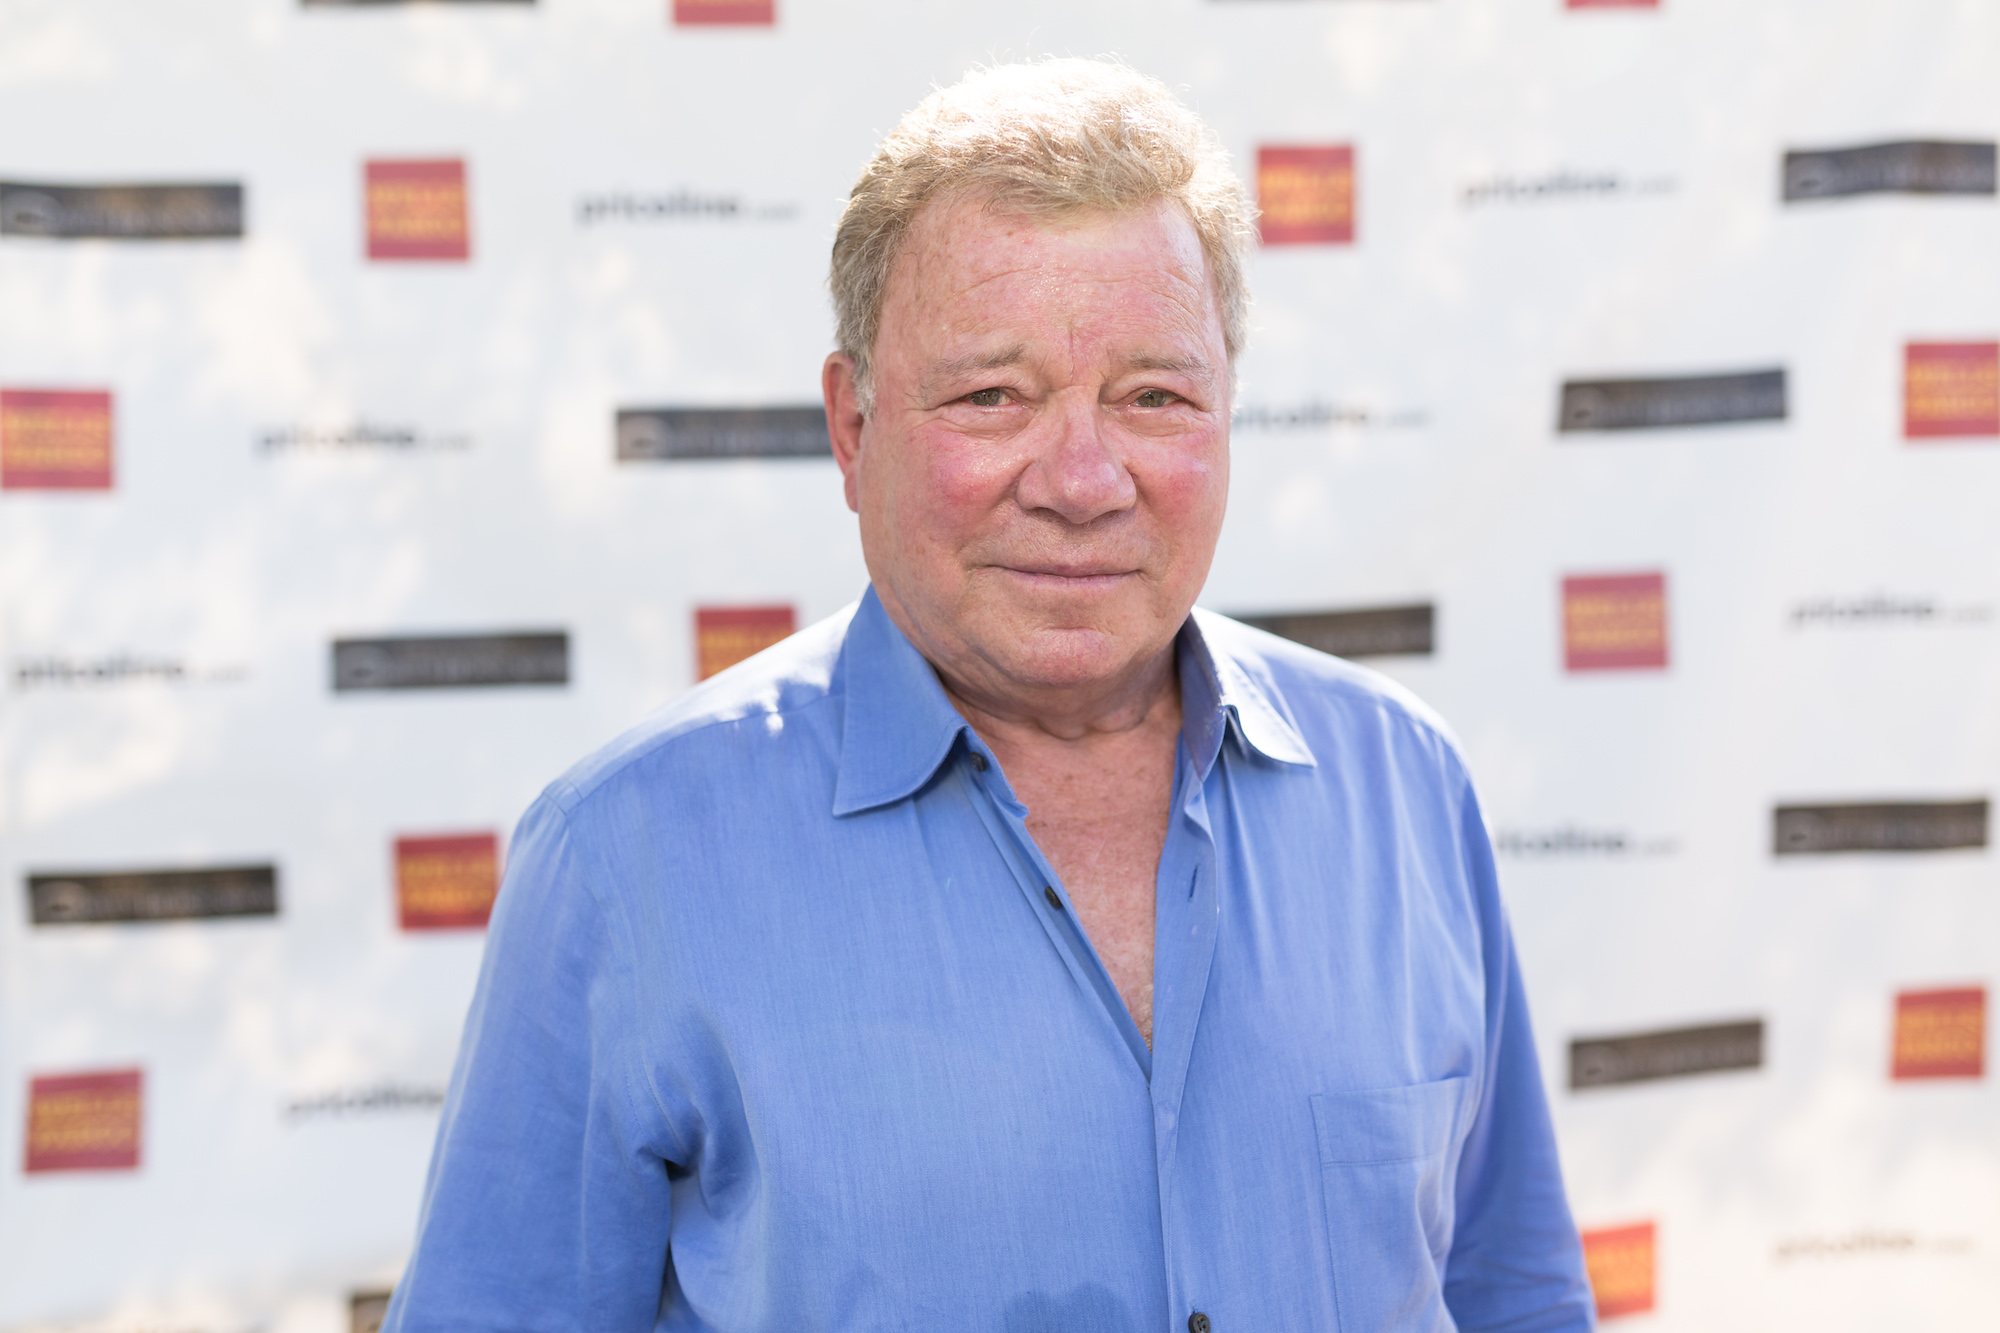 William Shatner smiling in front of a white background